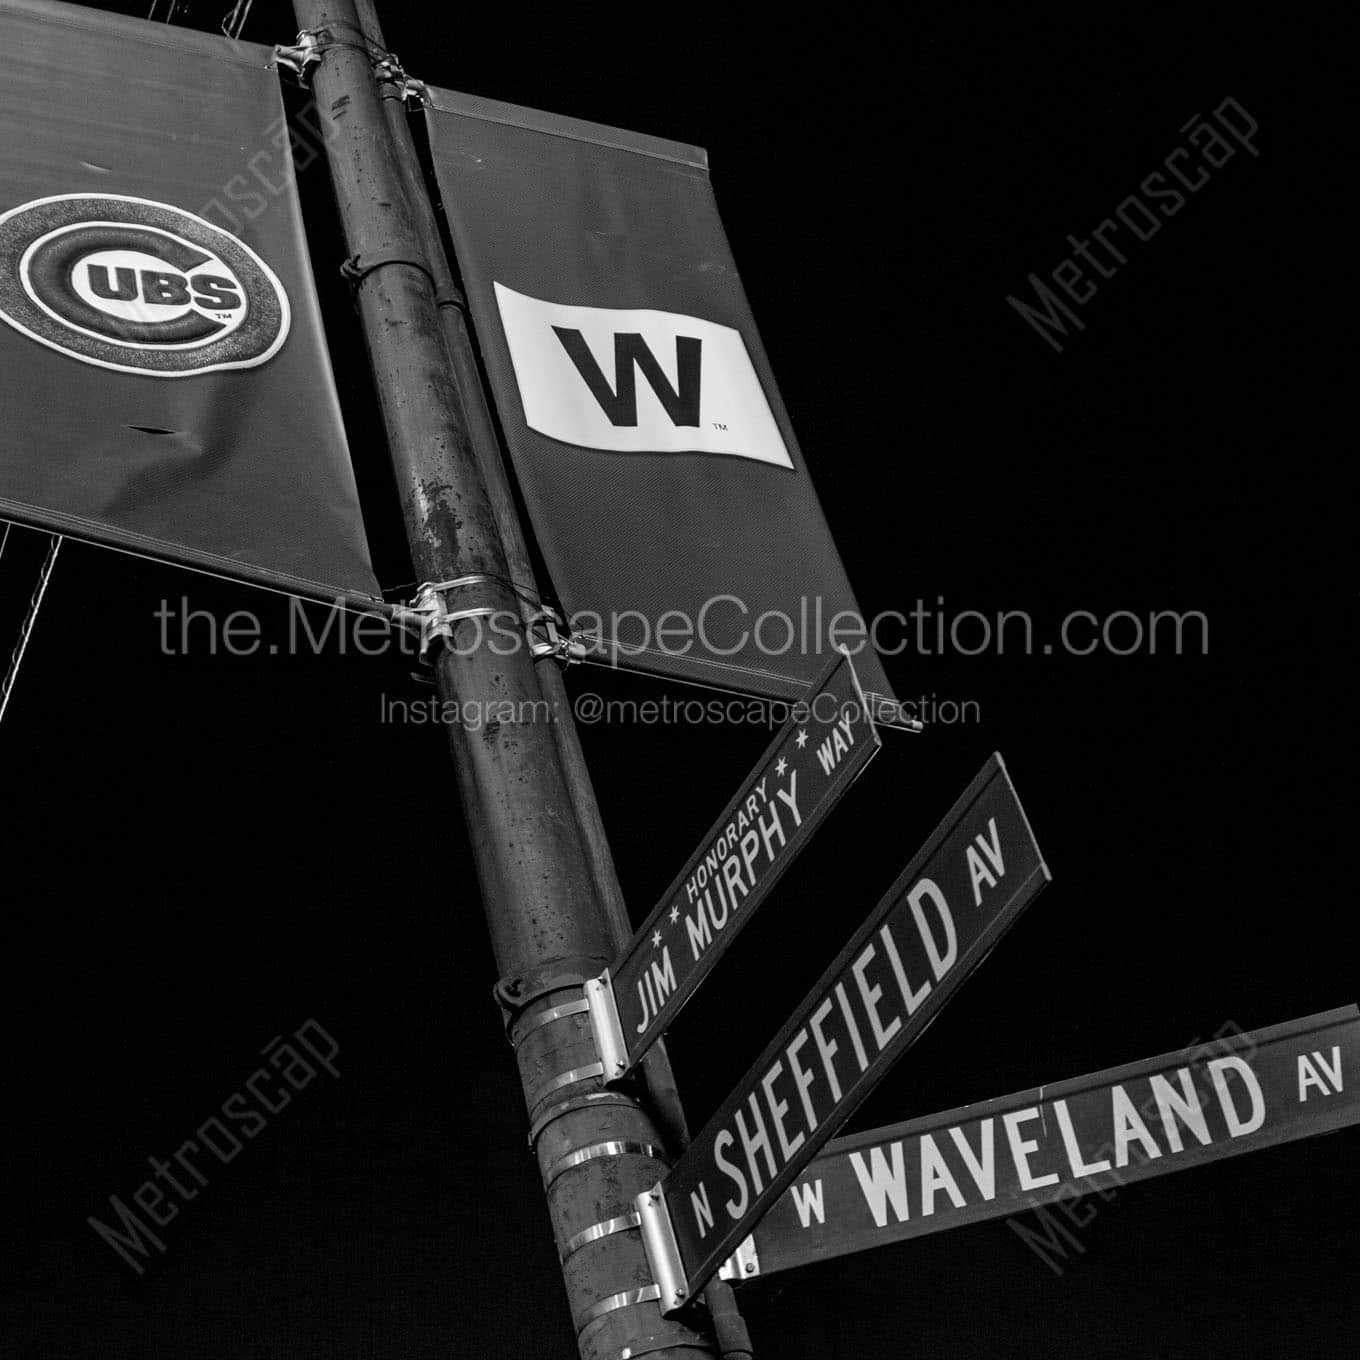 sheffield and waveland street signs Black & White Office Art